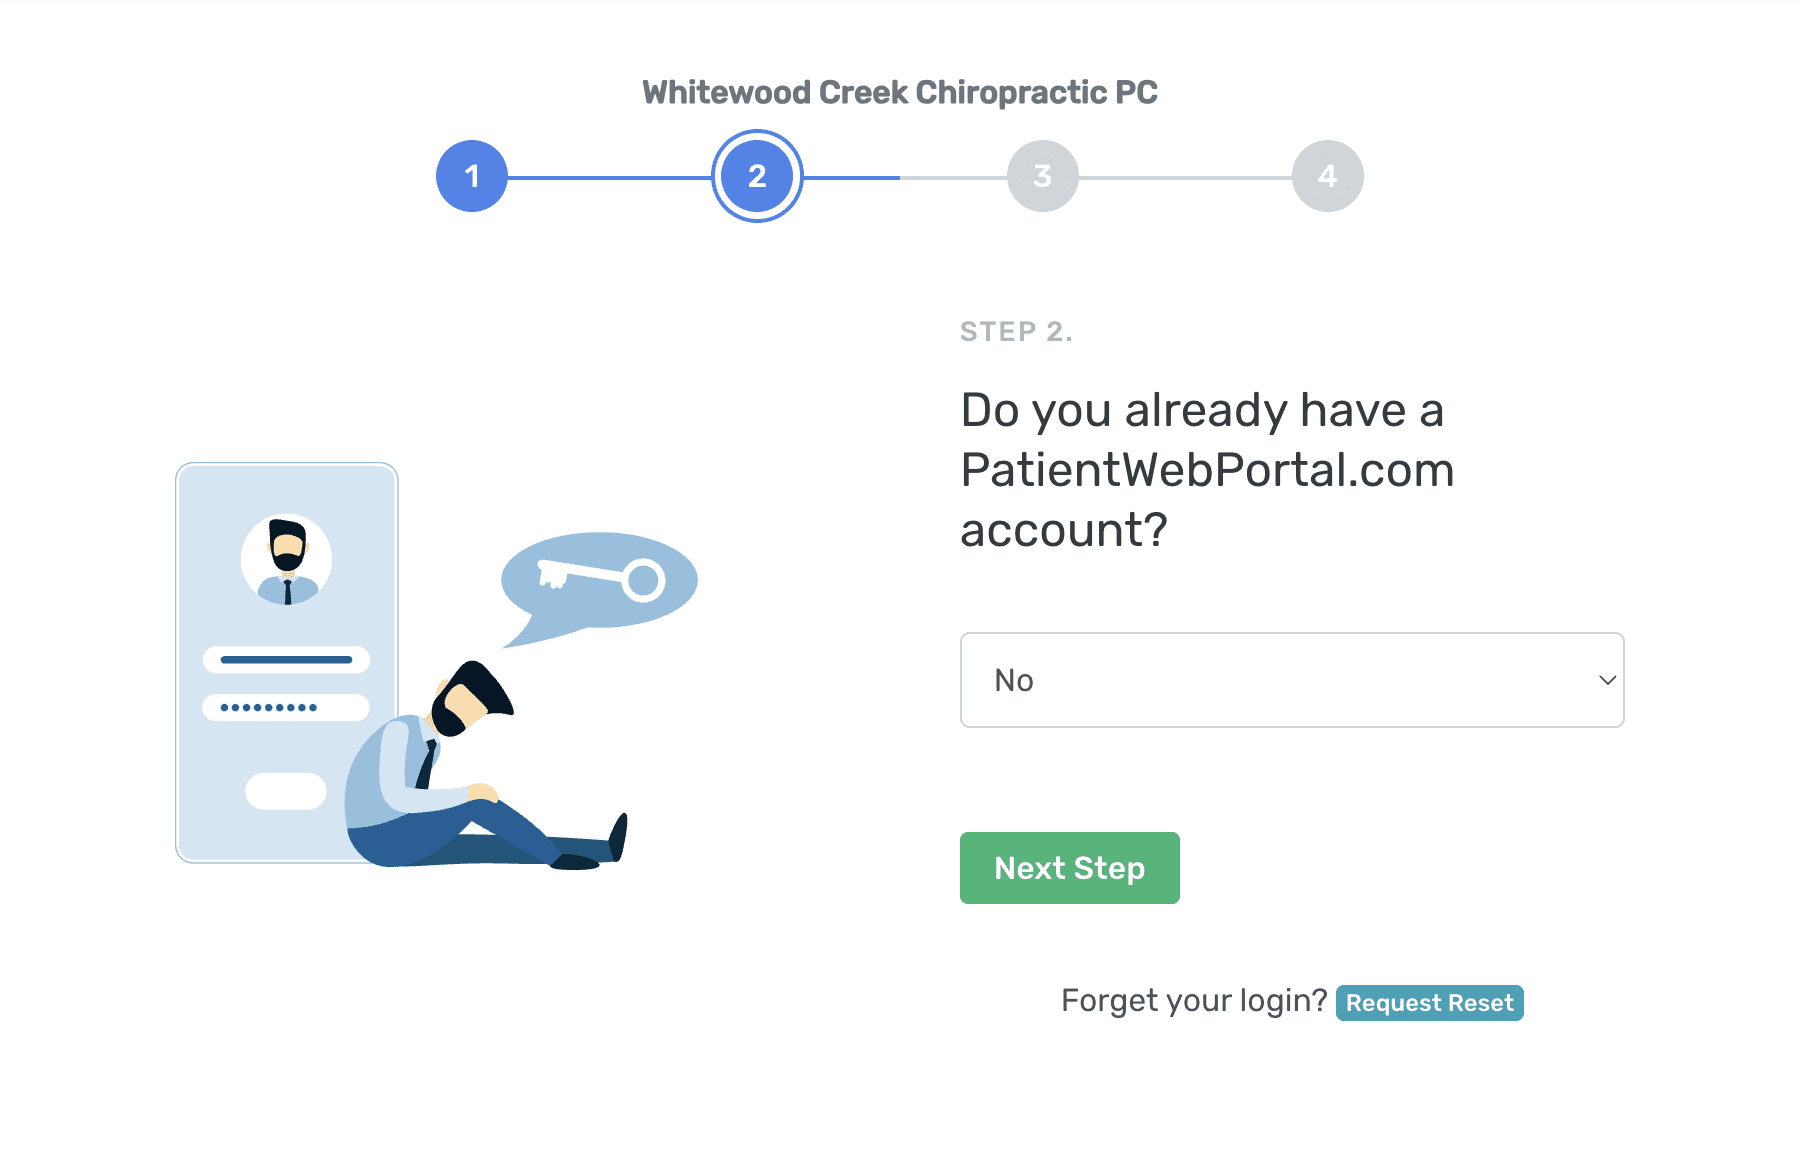 Step 3: Click "No" on do you already have a patientwebportal.com account question.